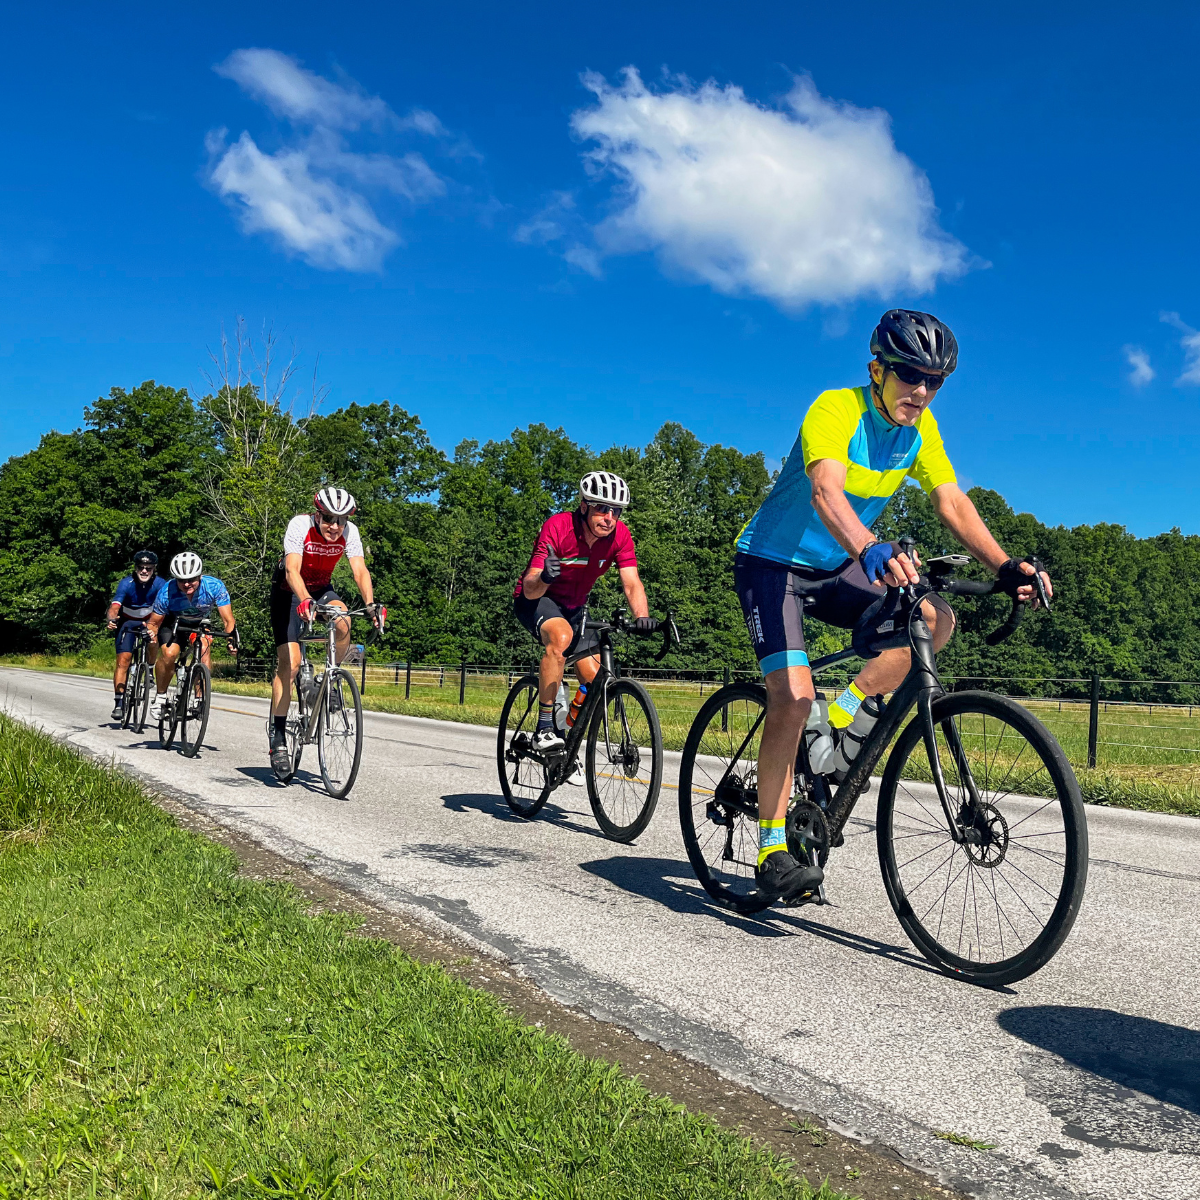 A group of cyclists riding on an open r